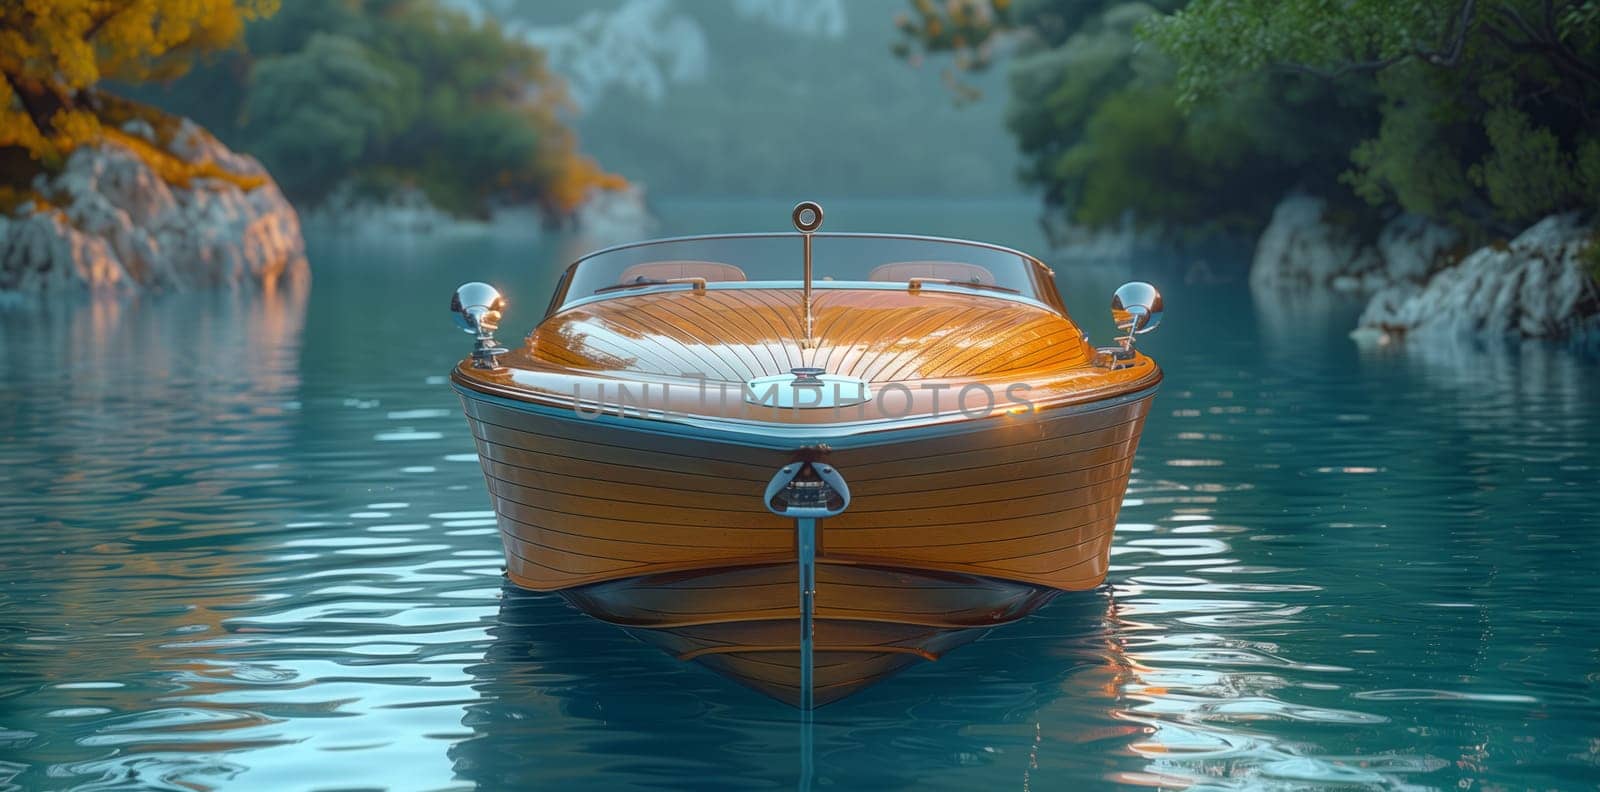 A watercraft leisurely floats on the tranquil liquid of a lake, blending harmoniously with the natural landscape of the picturesque setting